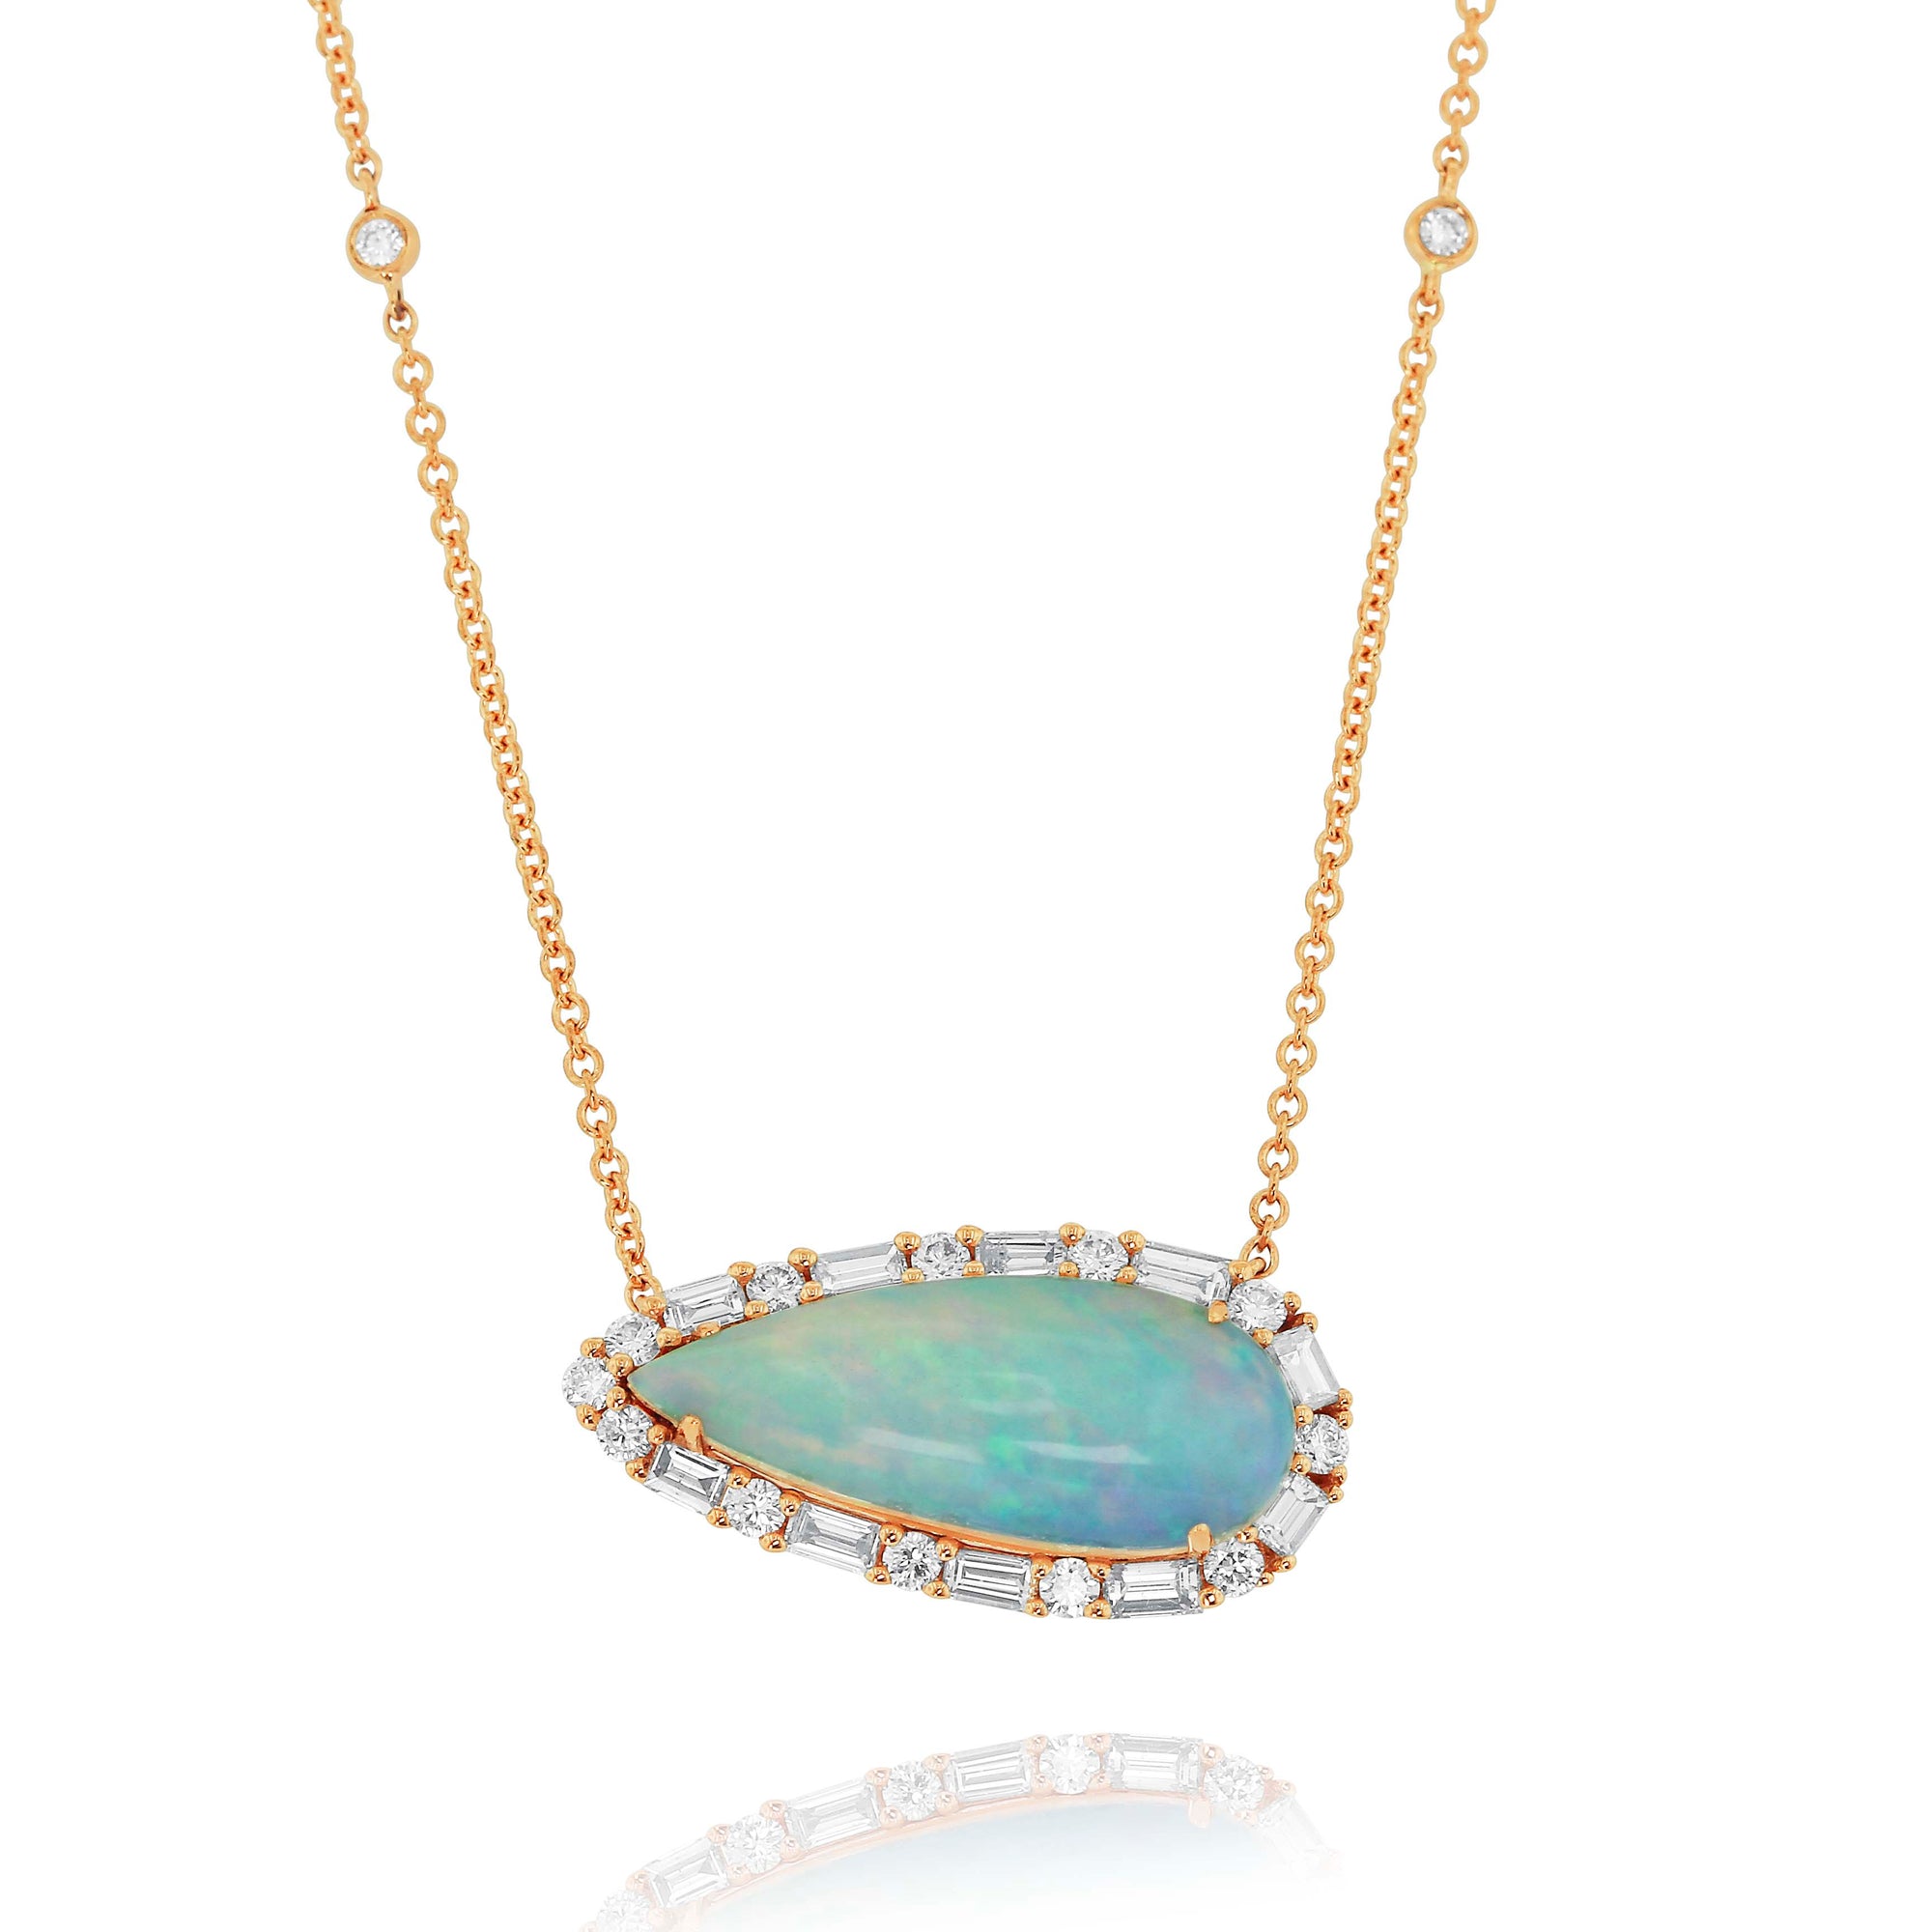 Pear-Shaped White Opal Necklace by Yael - Rose Gold - Talisman Collection Fine Jewelers